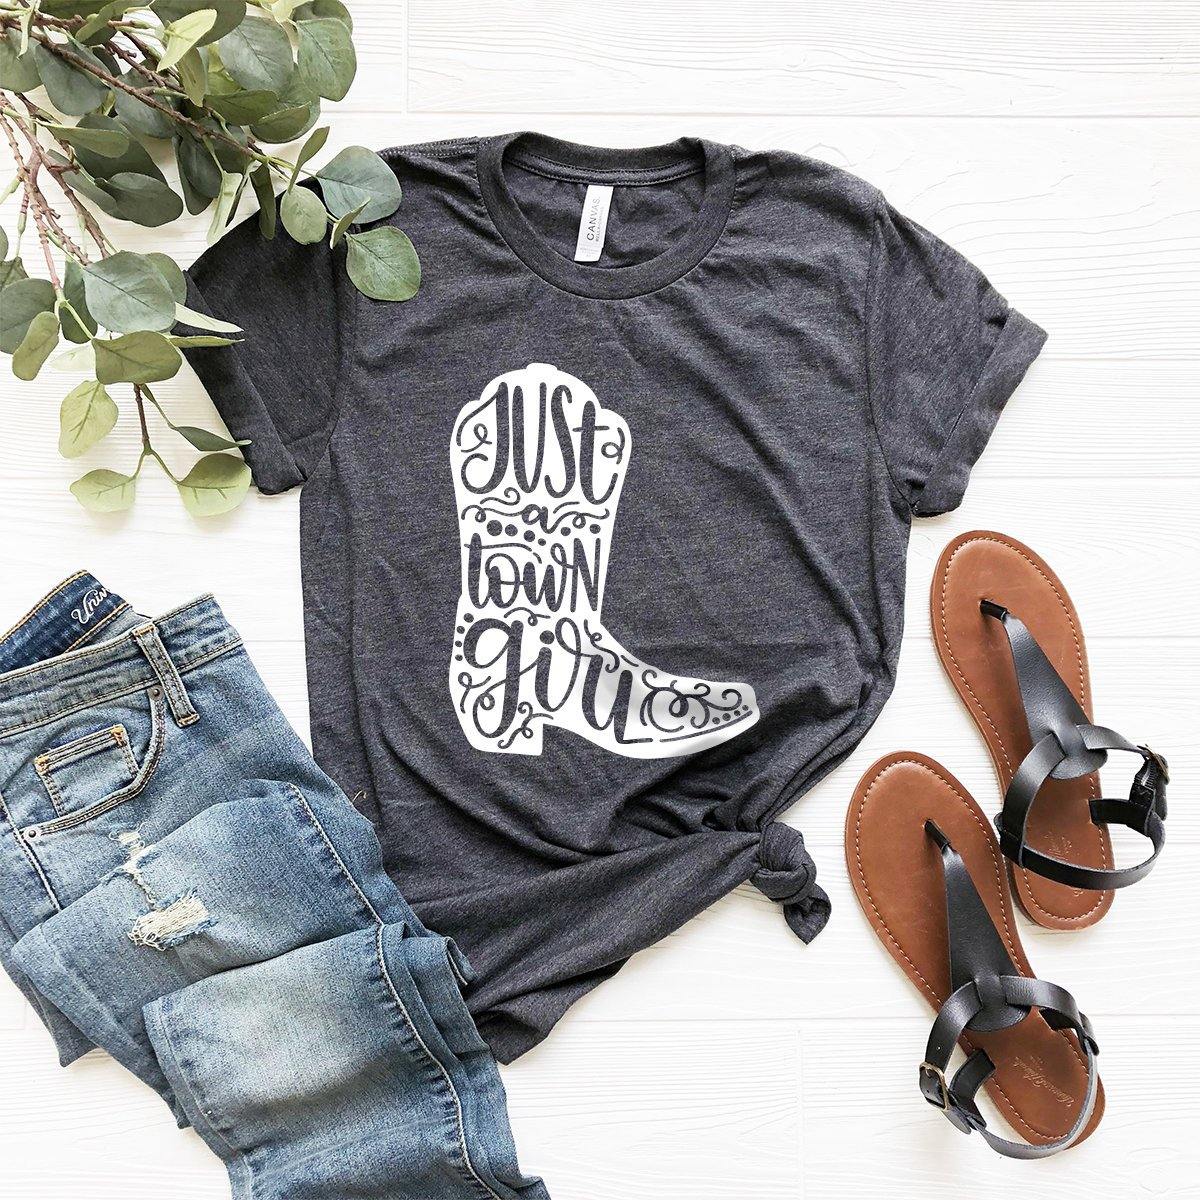 Cowgirl Boots Shirt, Country Shirt, Western Girl Shirt, Country Girl Shirt, Southern Girl Shirt, Southern Shirt, Just A Town Girl Shirt - Fastdeliverytees.com